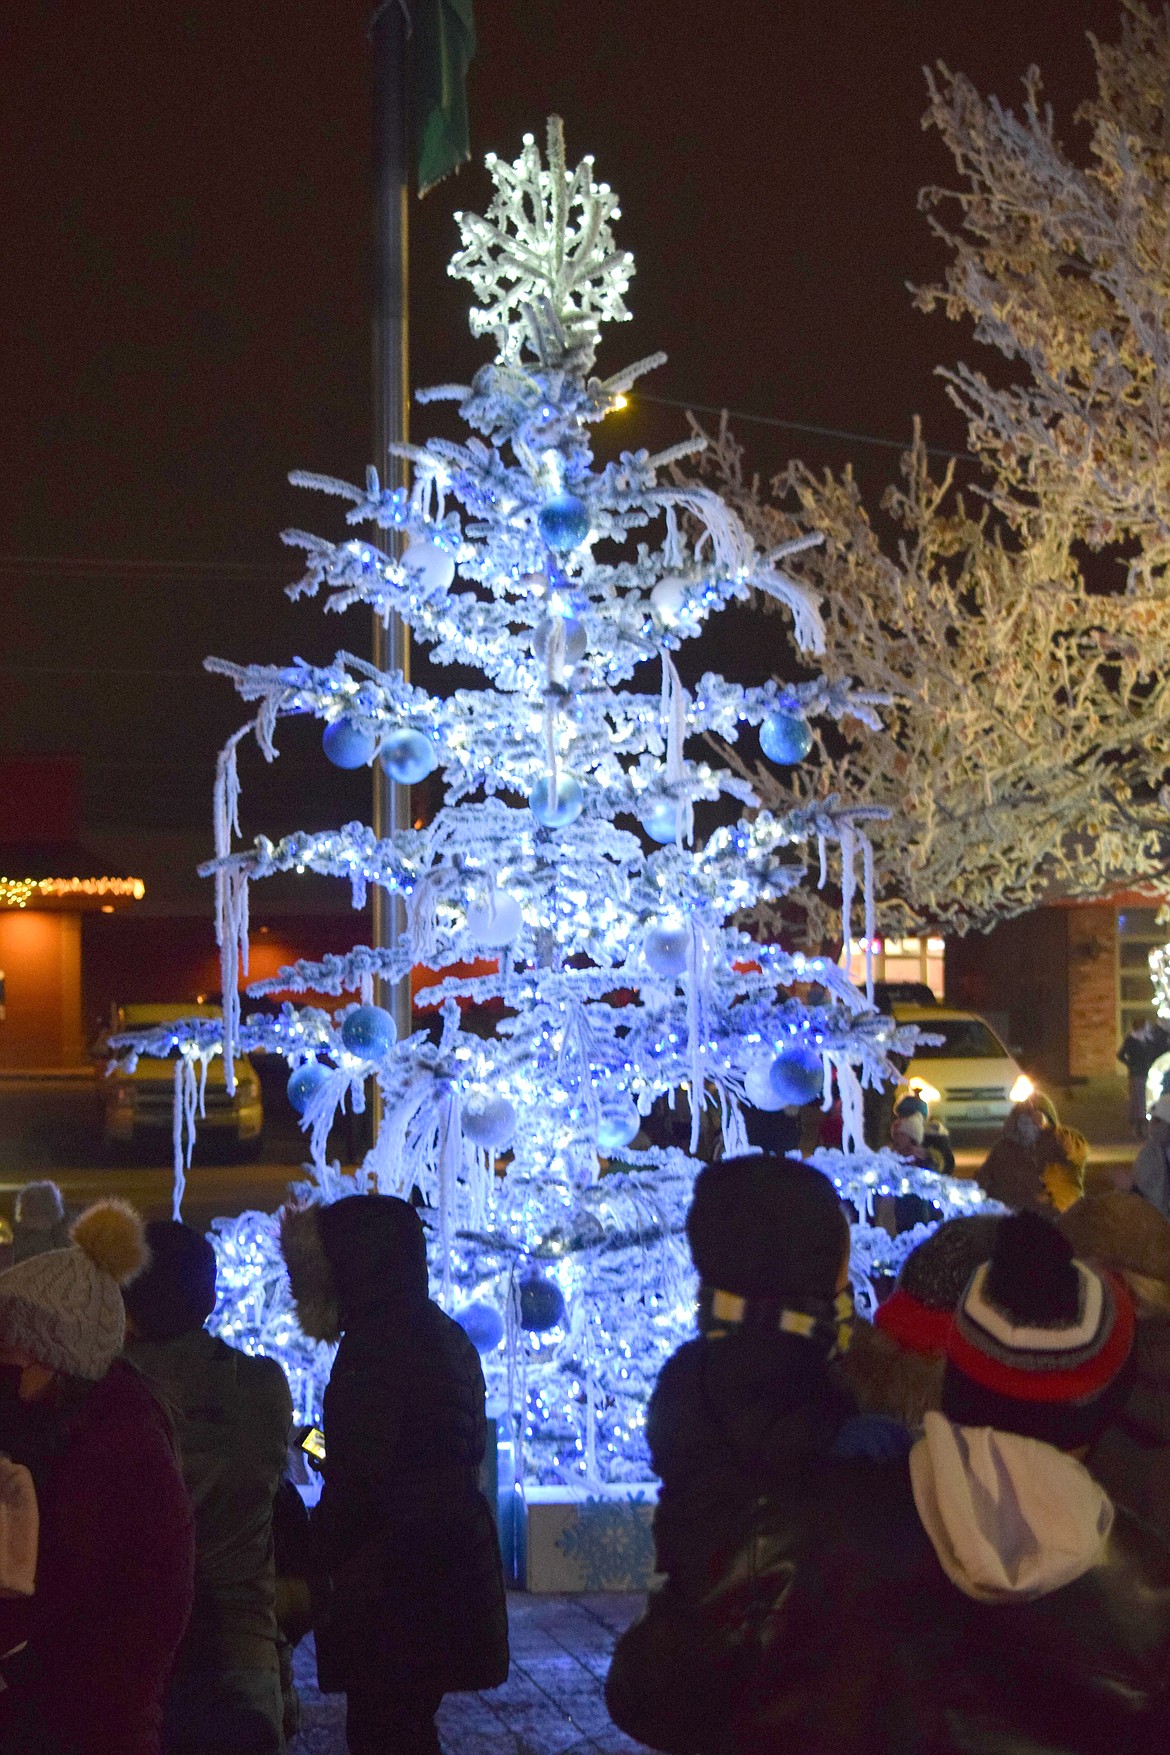 The Othello community Christmas tree sparkles on the lawn outside Othello City Hall in December 2020. Lighting the tree is part of the annual Christmas Miracle on Main Street celebration, scheduled for Dec. 4.